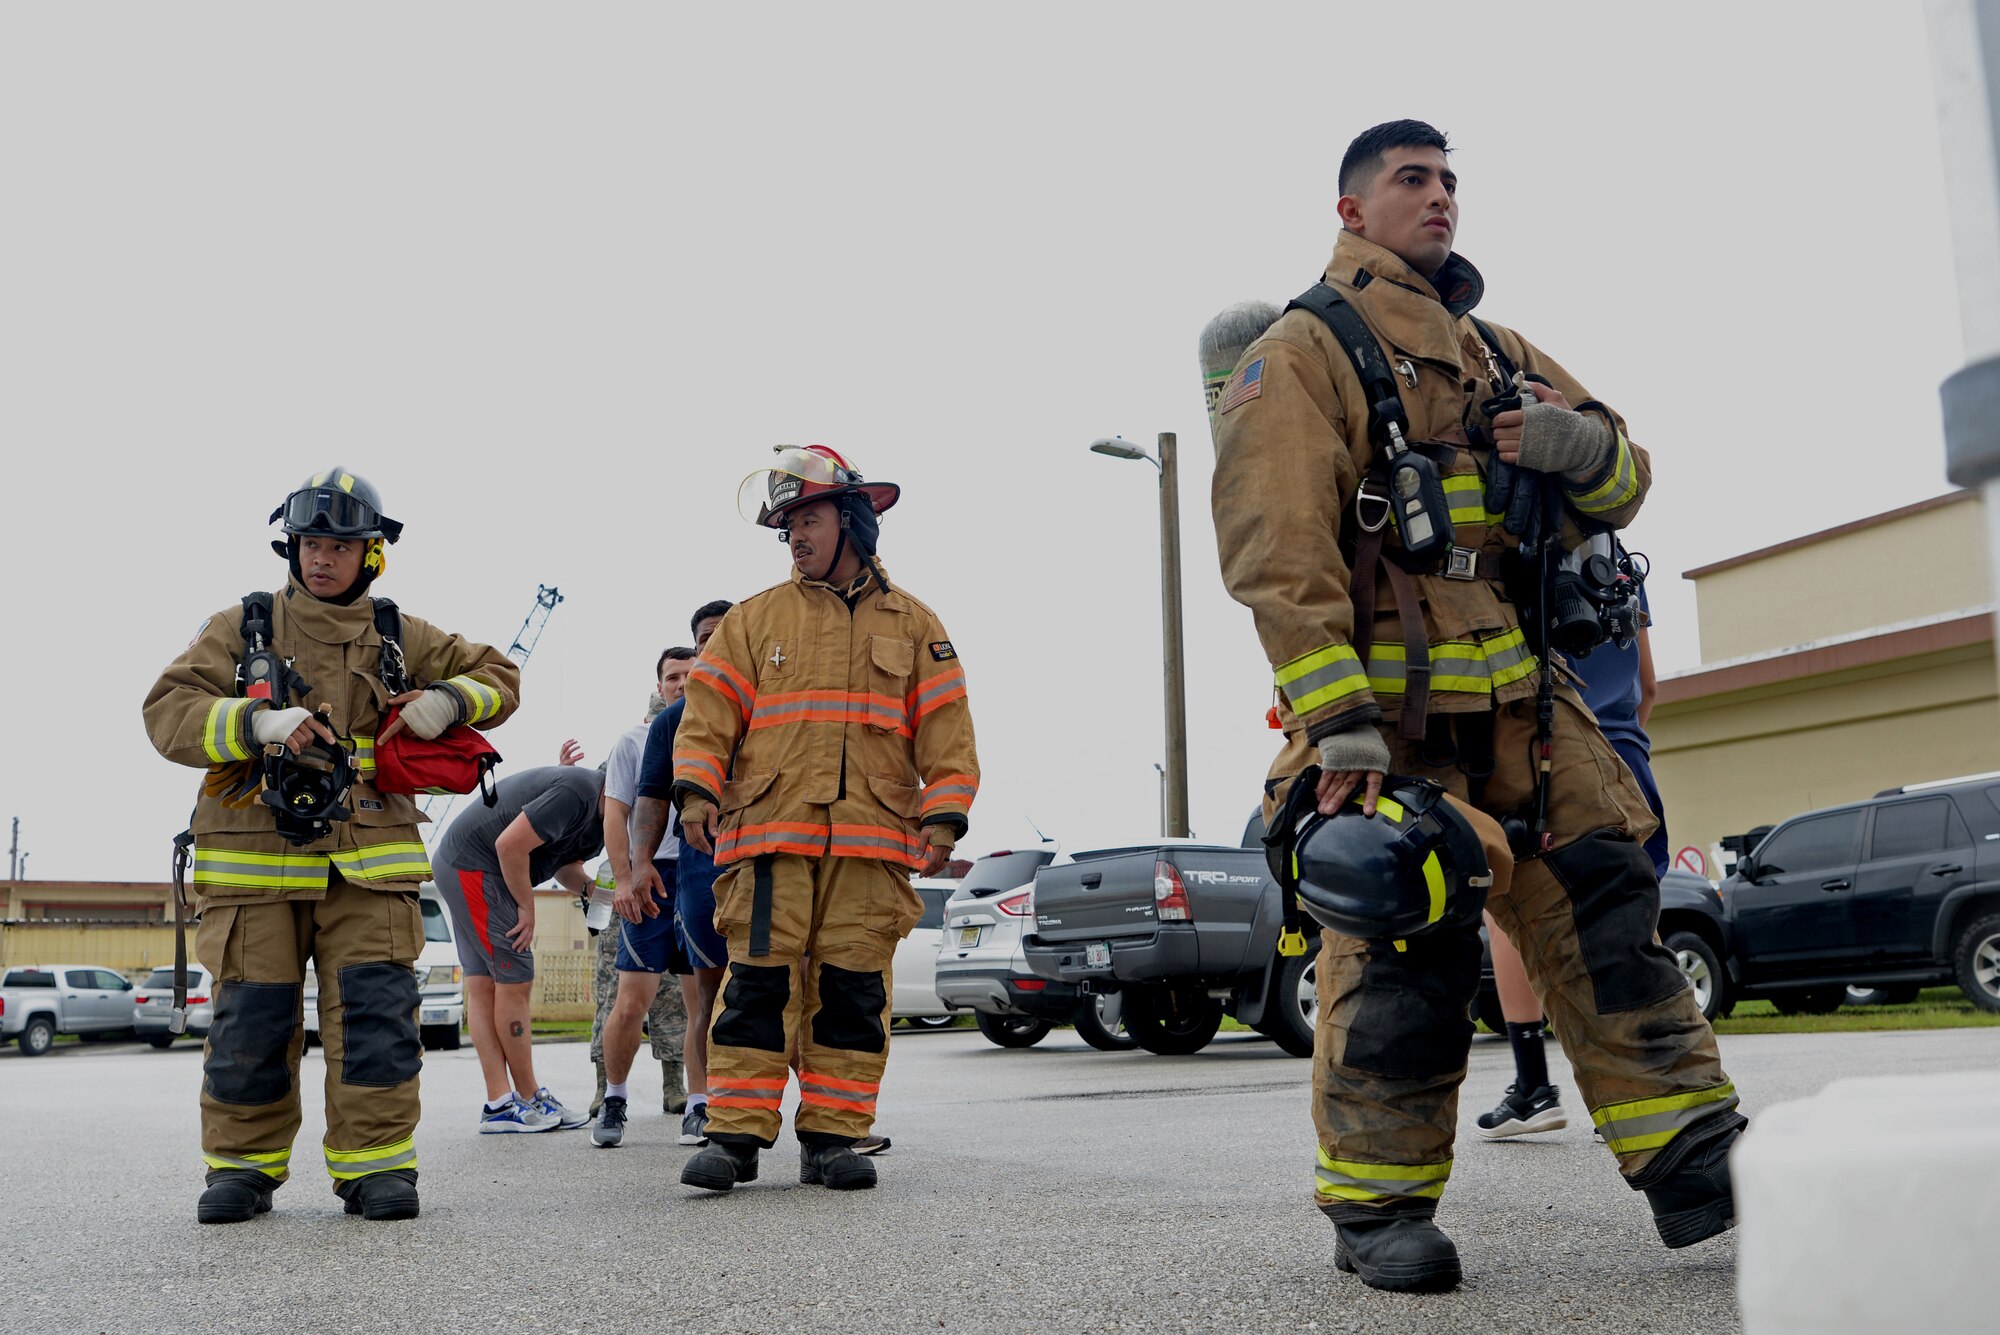 Members of the 36th Civil Engineer Squadron fire department wait to climb the 36th Operation Support Squadron air traffic control tower during a September 11 memorial stair climb event on Andersen Air Force Base, Guam, Sept. 11, 2019.